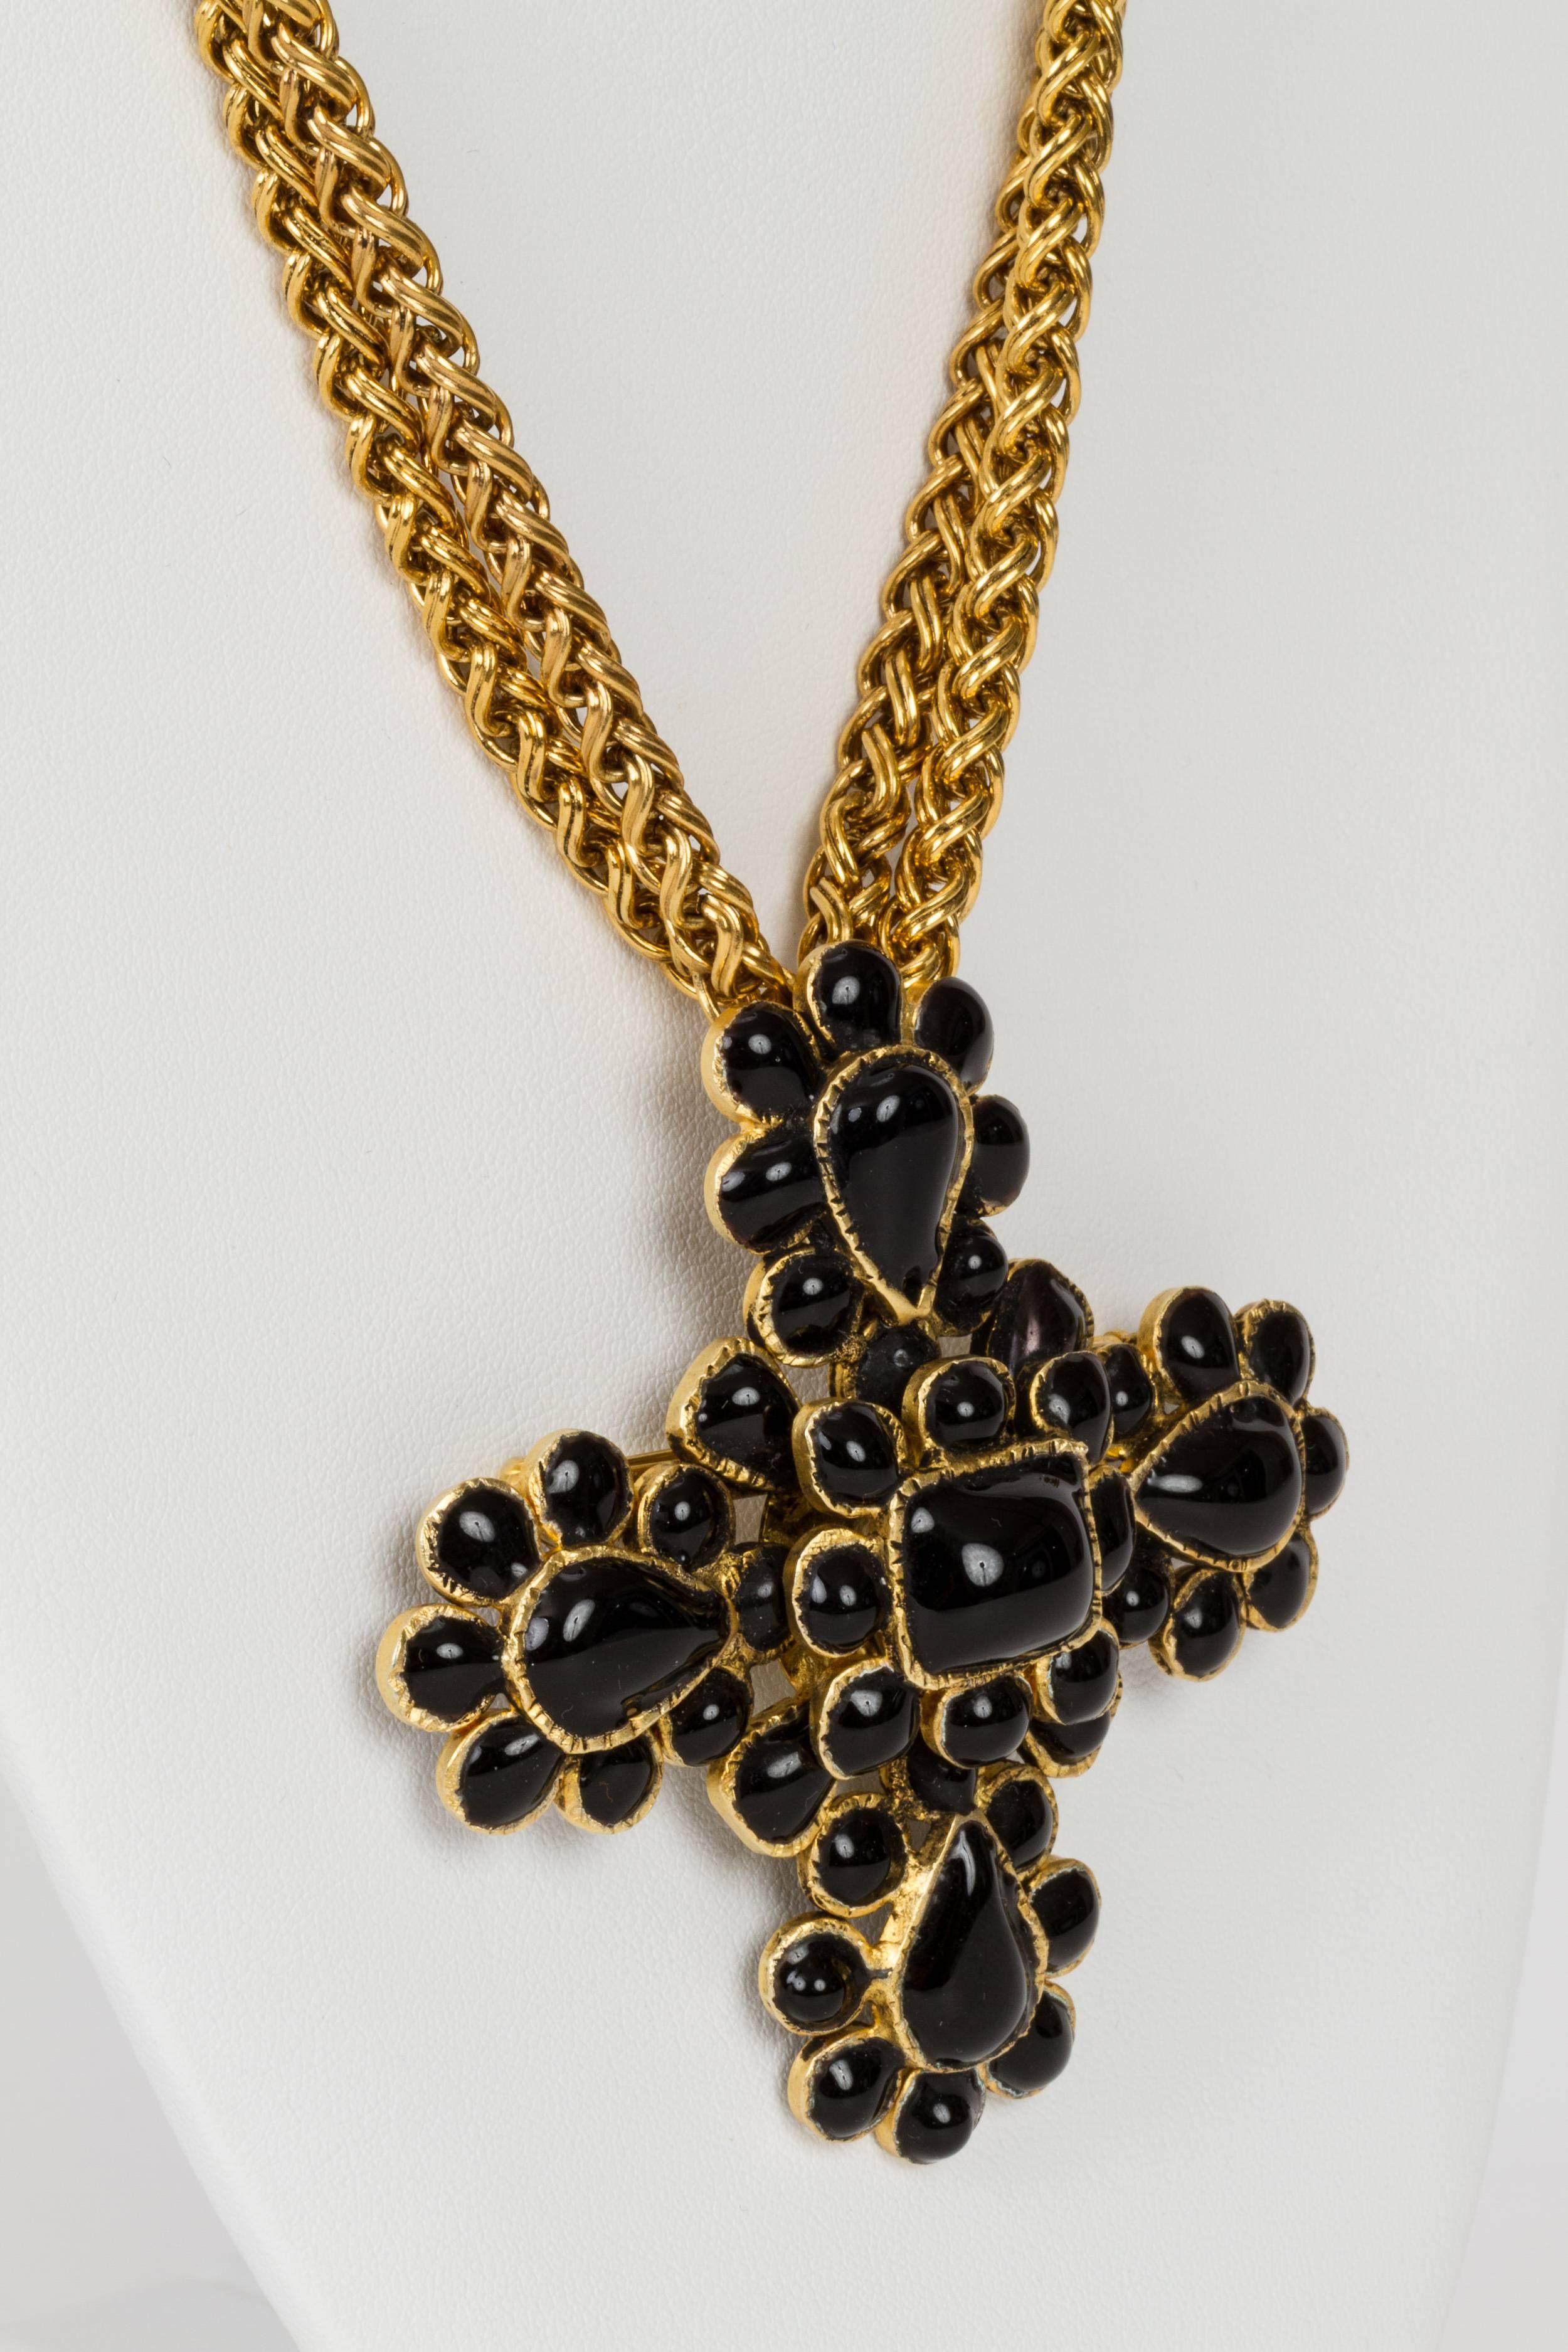 Rare Chanel black gripoix necklace with double-strand chain and detachable cross pin, 1982. Comes from a private collection and has never been worn. In the original vintage Chanel box.